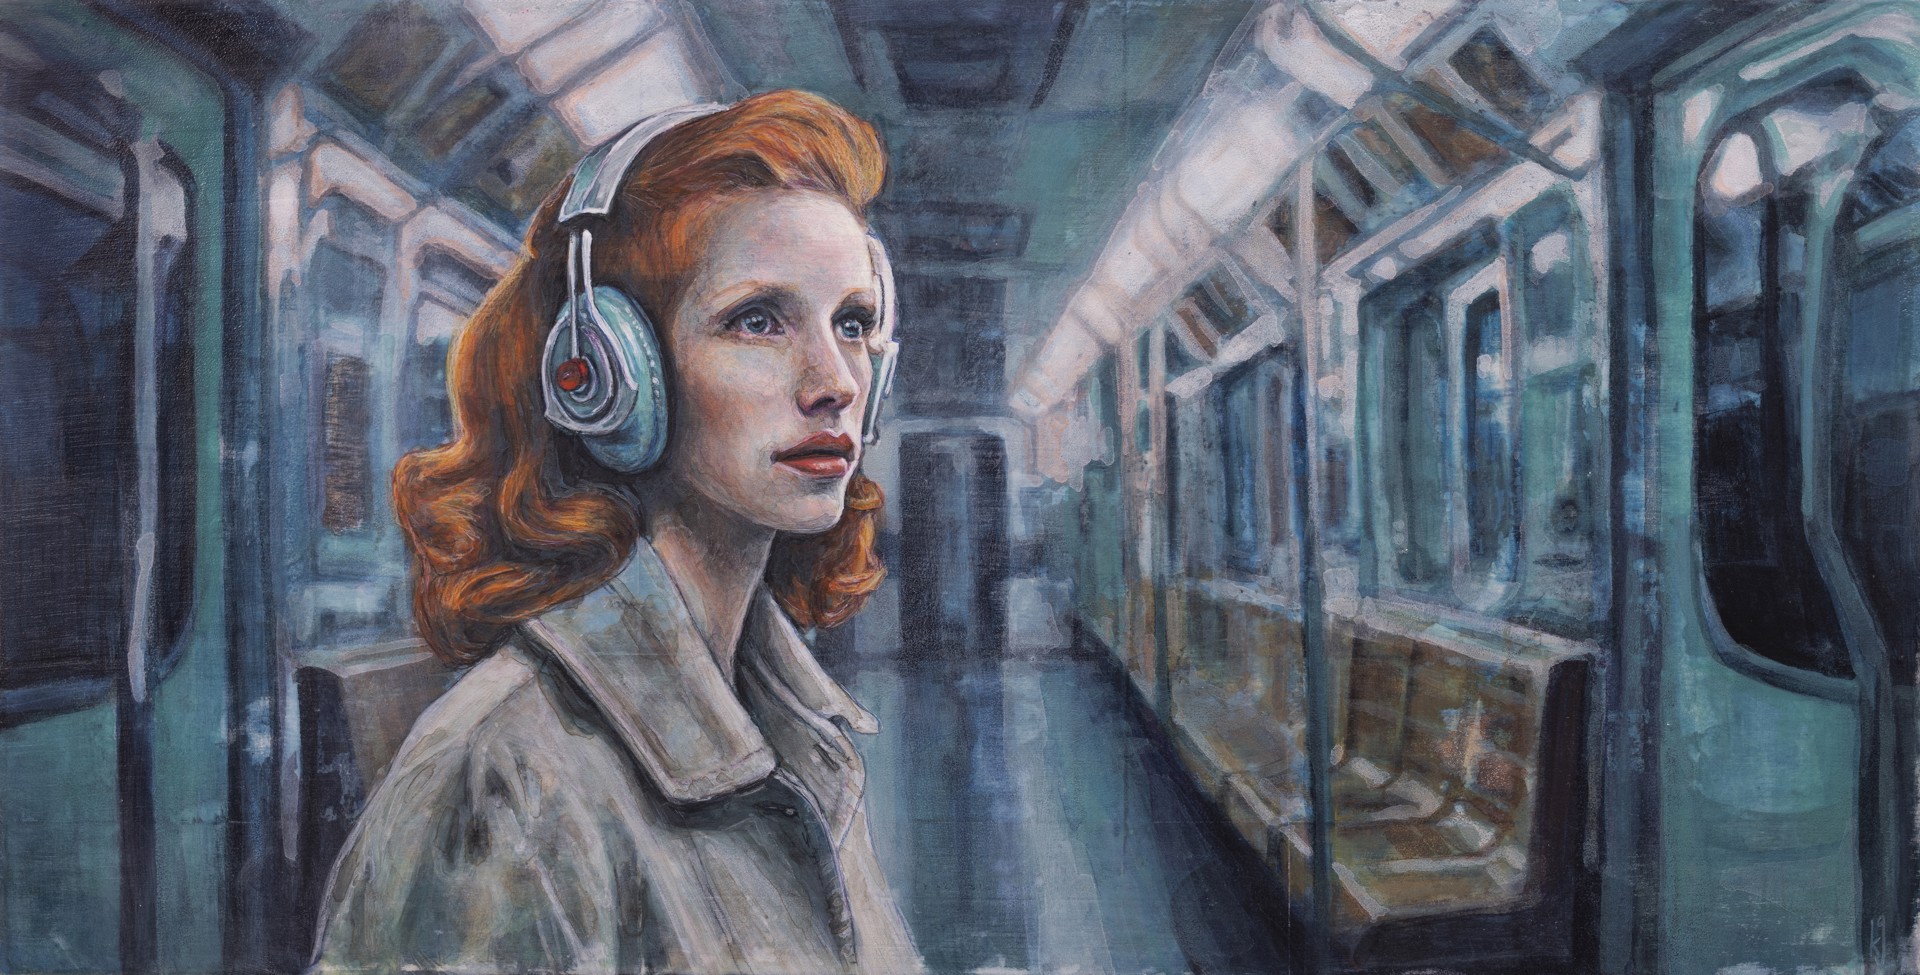 Into The Station by Kelly Grace